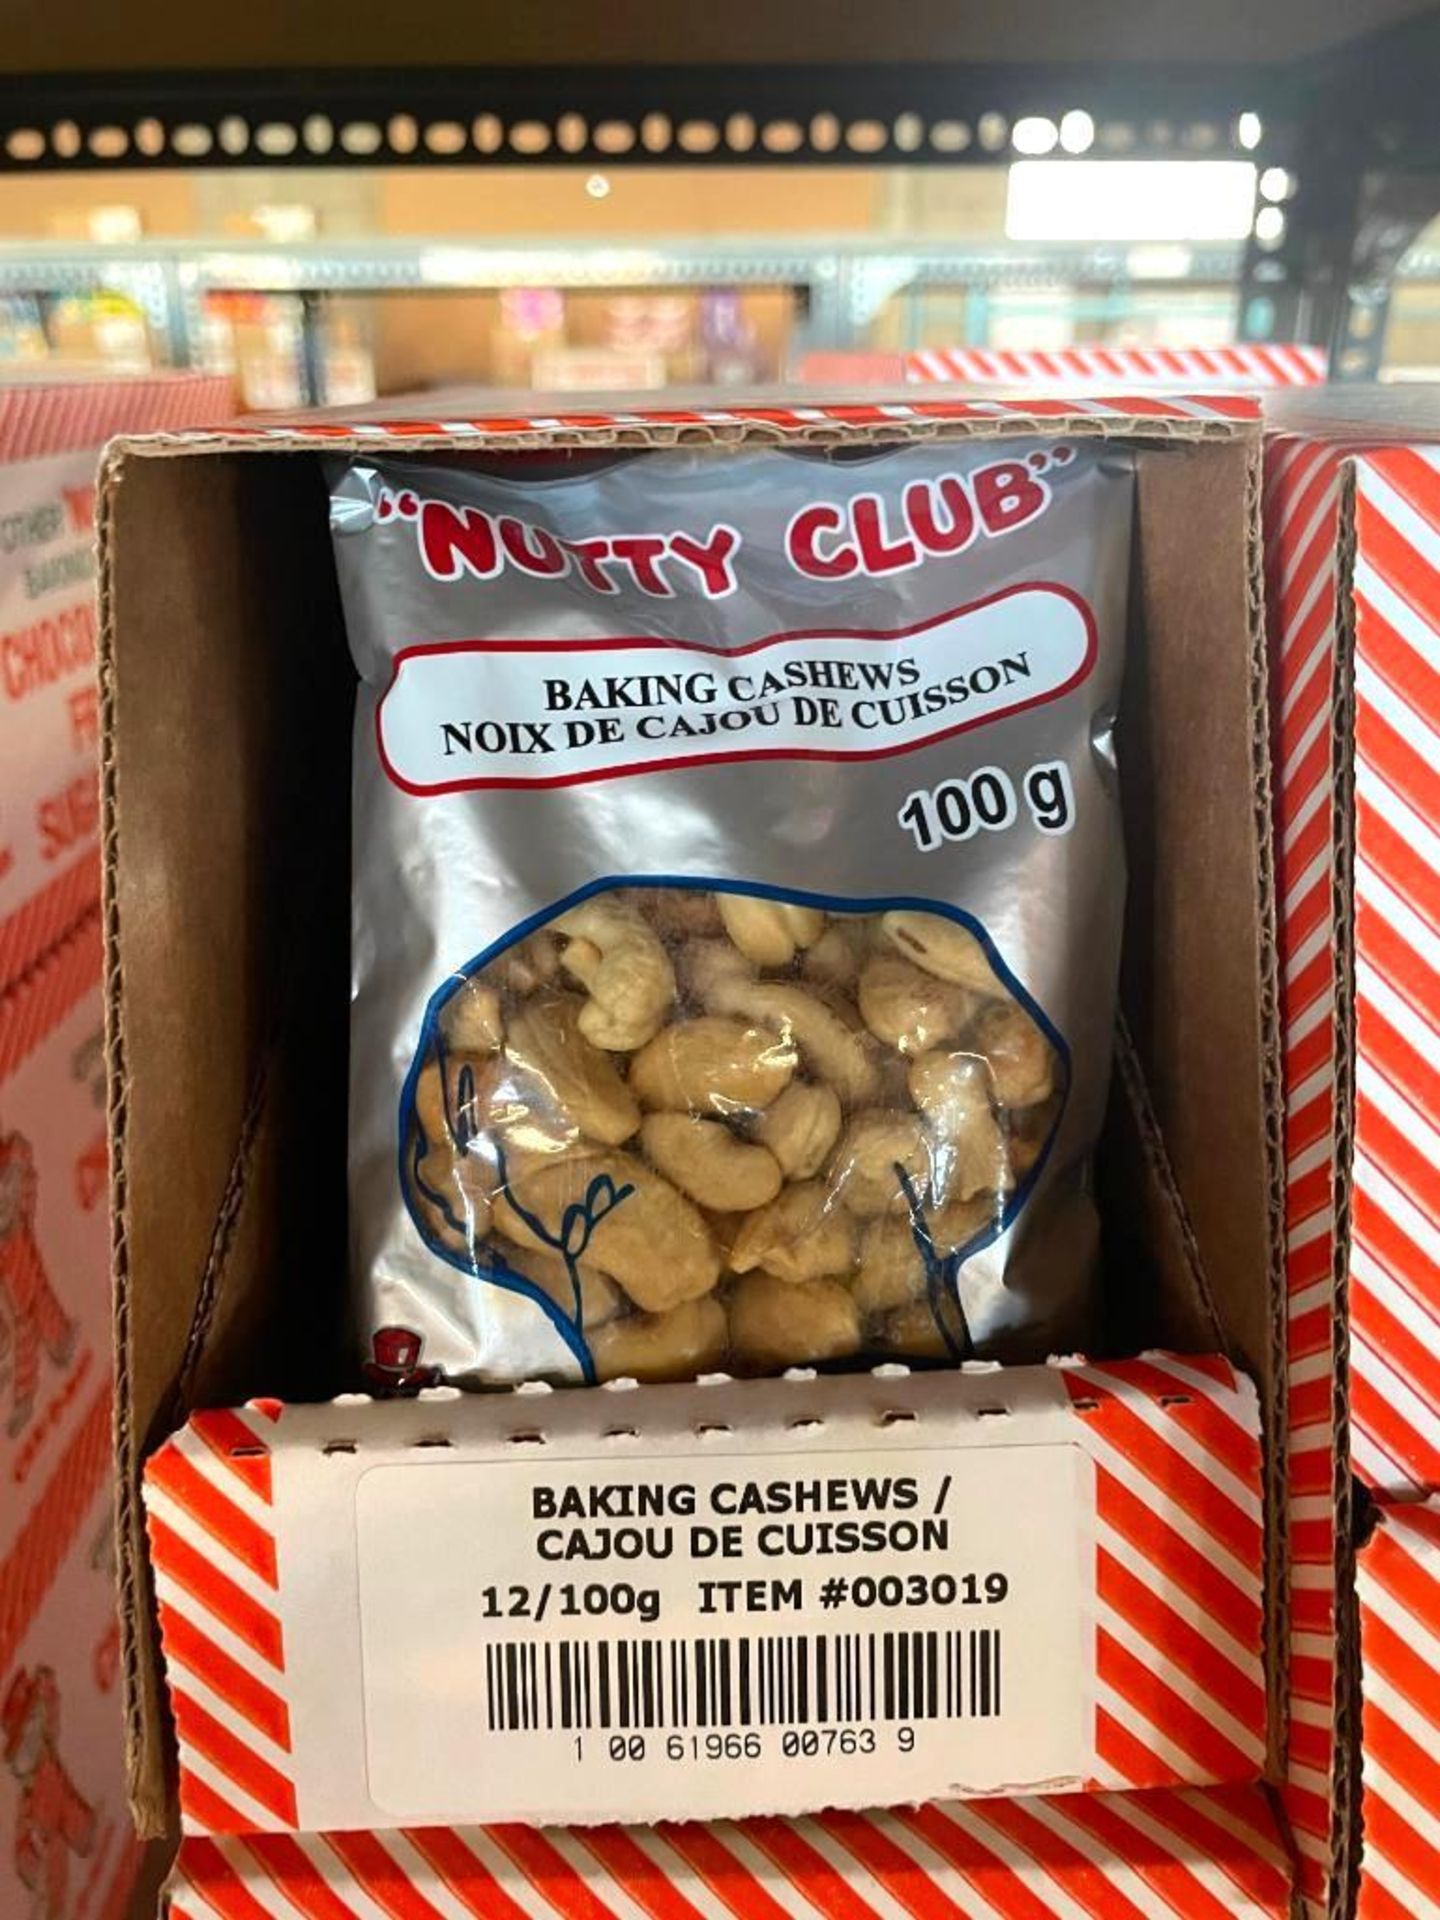 (11) BOXES OF NUTTY CLUB BAKING CASHEWS, 12/100G BAGS PER BOX - Image 2 of 3